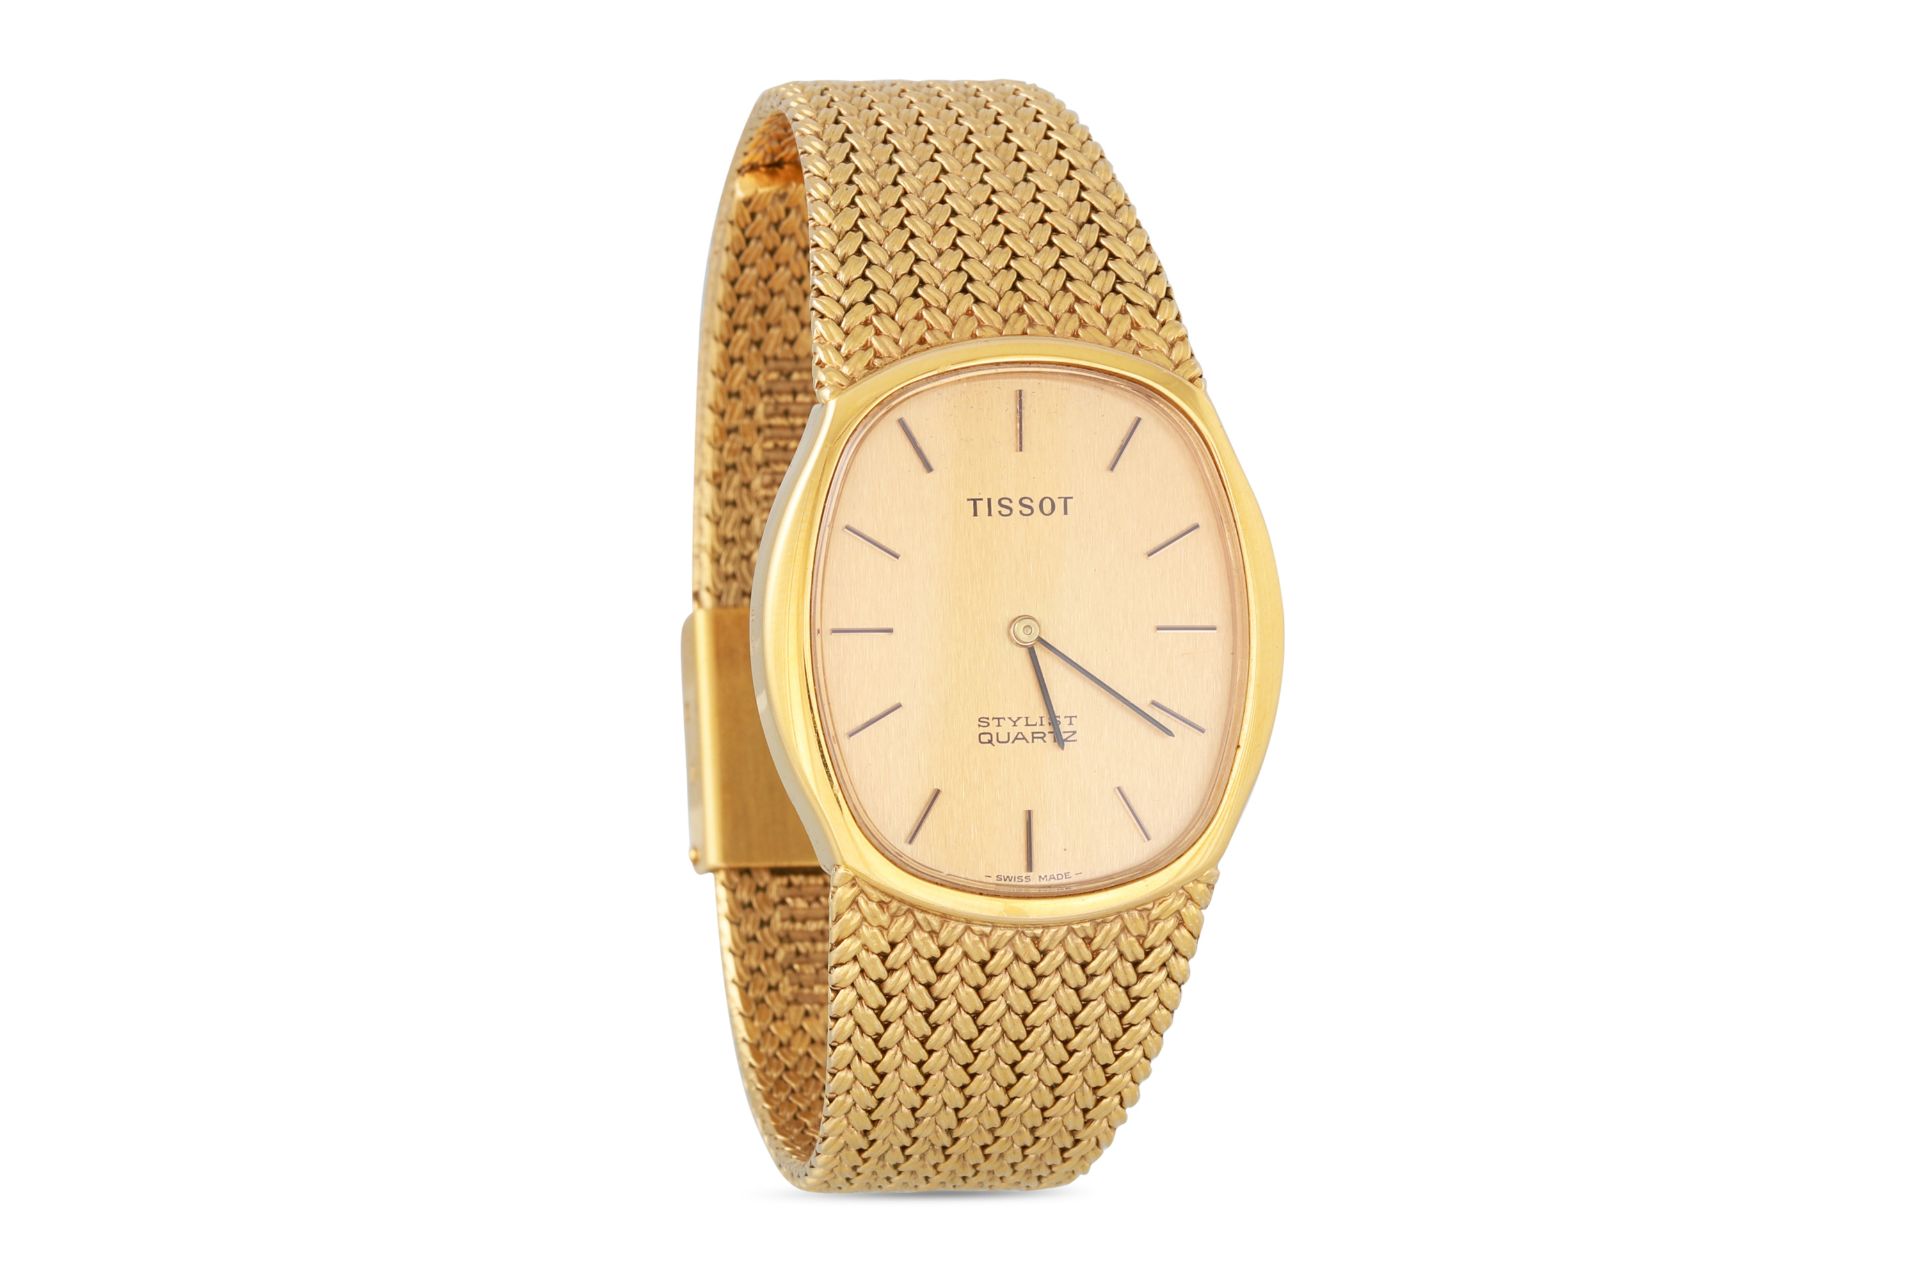 A MID SIZE SLIM LINE TISSOT STYLIST QUARTZ WRISTWATCH, in gold plate, champagne face with baton